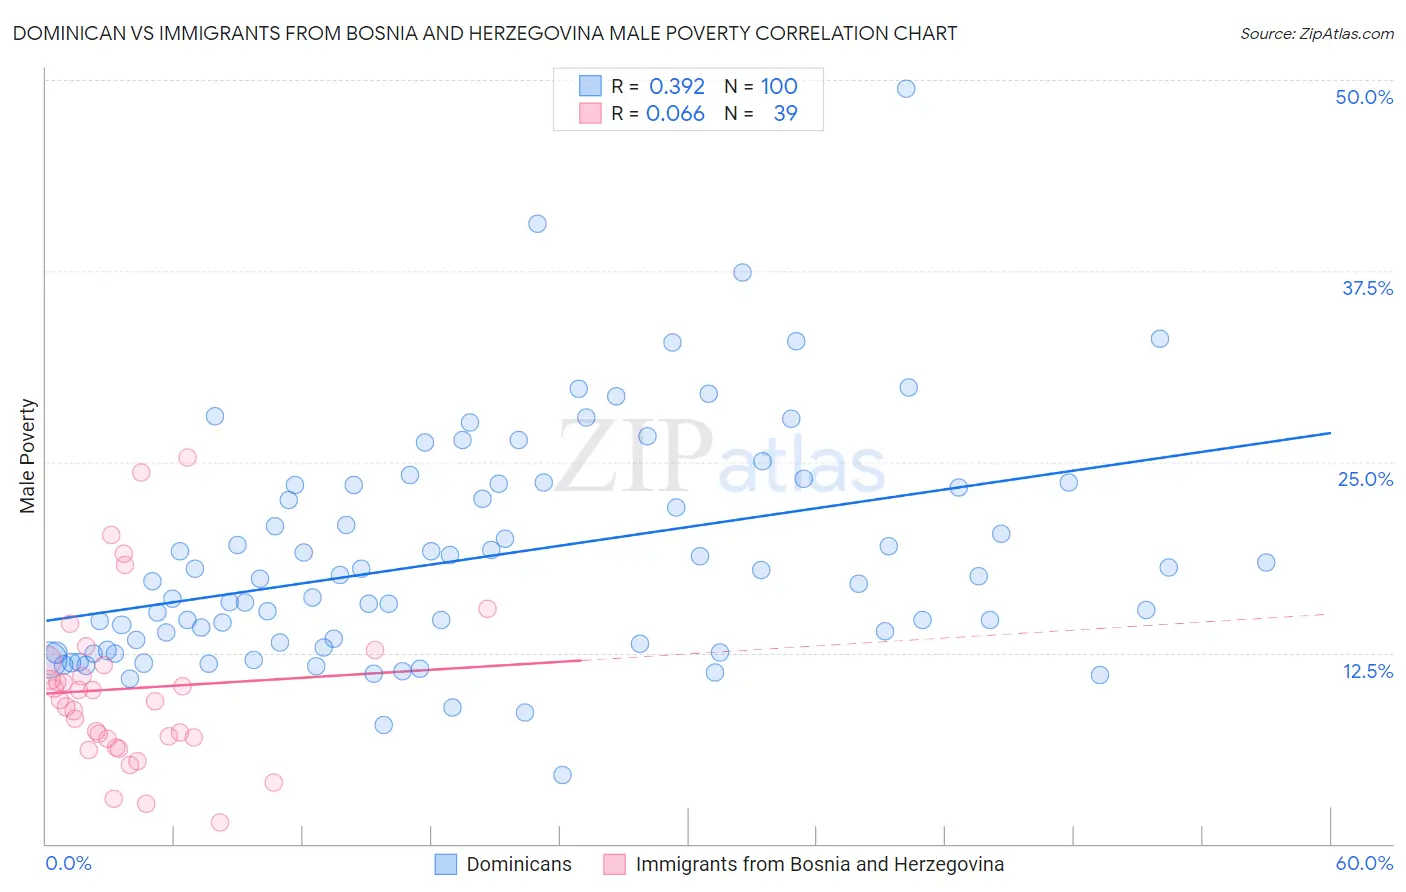 Dominican vs Immigrants from Bosnia and Herzegovina Male Poverty